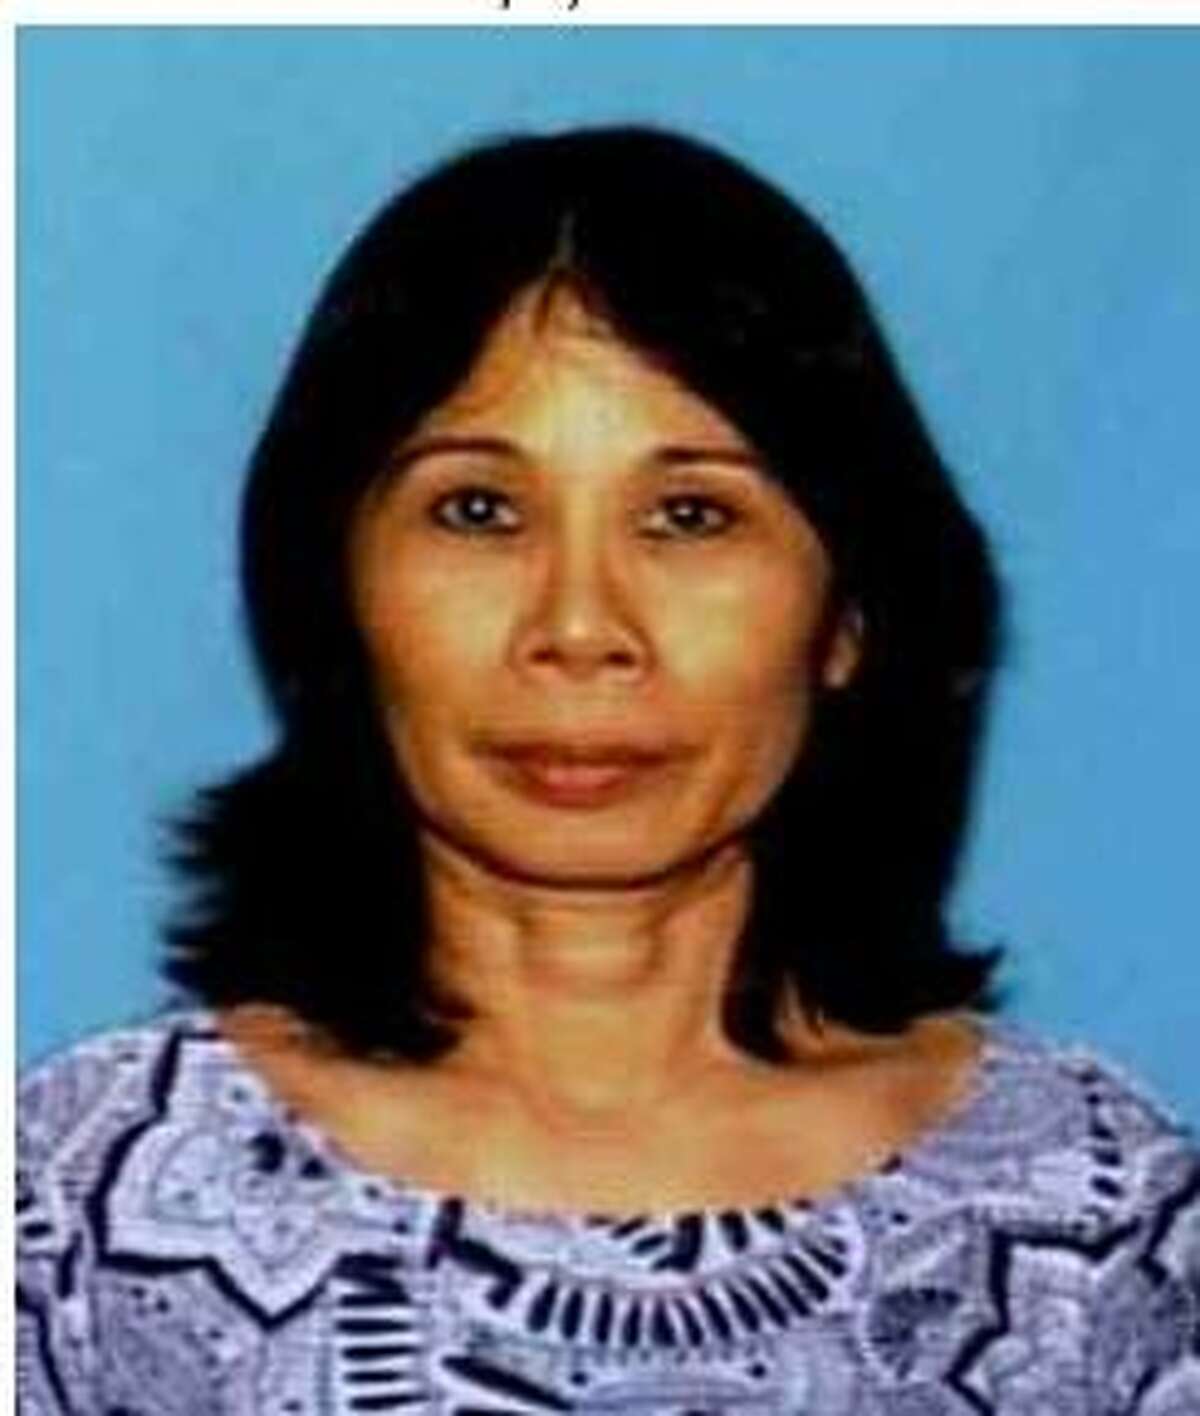 Cuc Thi Nguyen is suspected of beating her husband to death before killing herself, police said.